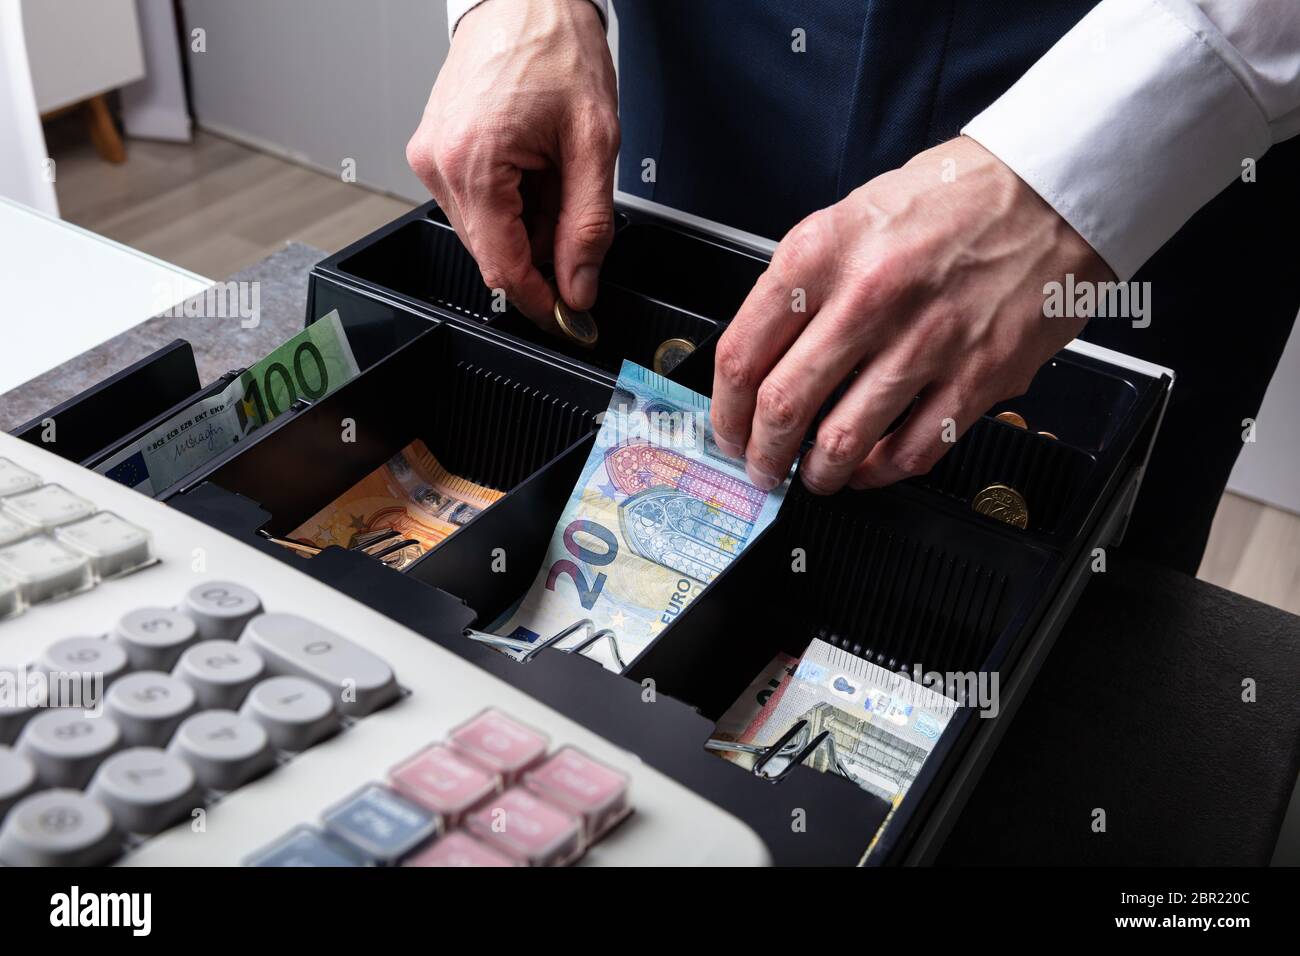 An Overhead View Of Cashier's Hand Taking Banknote From Opened Till Stock Photo